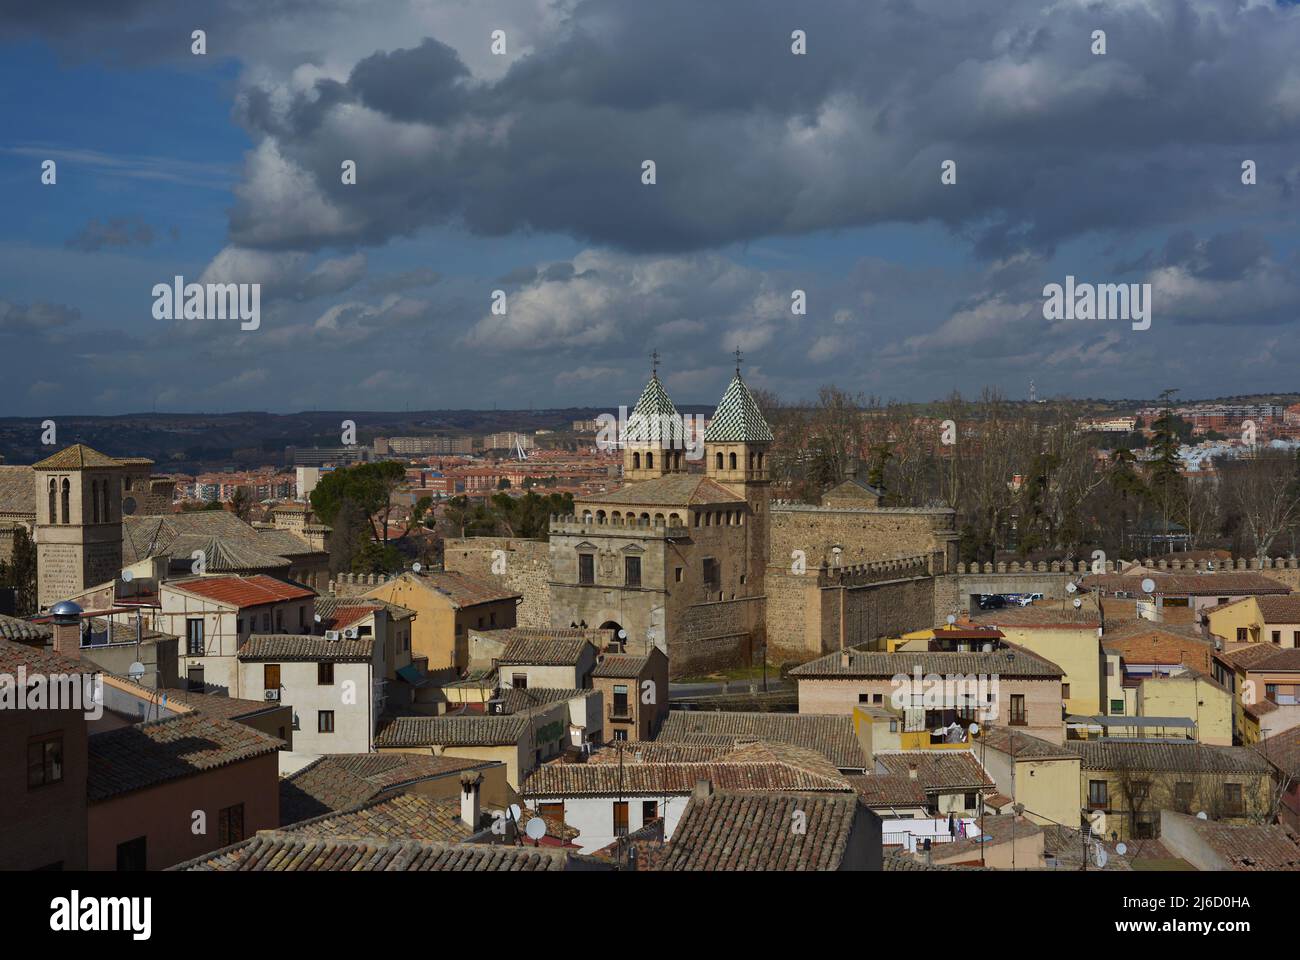 Spain, Toledo. Panoramic view of the city in which it can be seen the New Bisagra Gate (Puerta Nueva de Bisagra) of Moorish origin, rebuilt in the 16th century by Alonso de Covarrubias (1488-1570). On the left, the Church of Santiago el Mayor, built in the 13th century in Mudejar style. Restored in the 20th century. Stock Photo